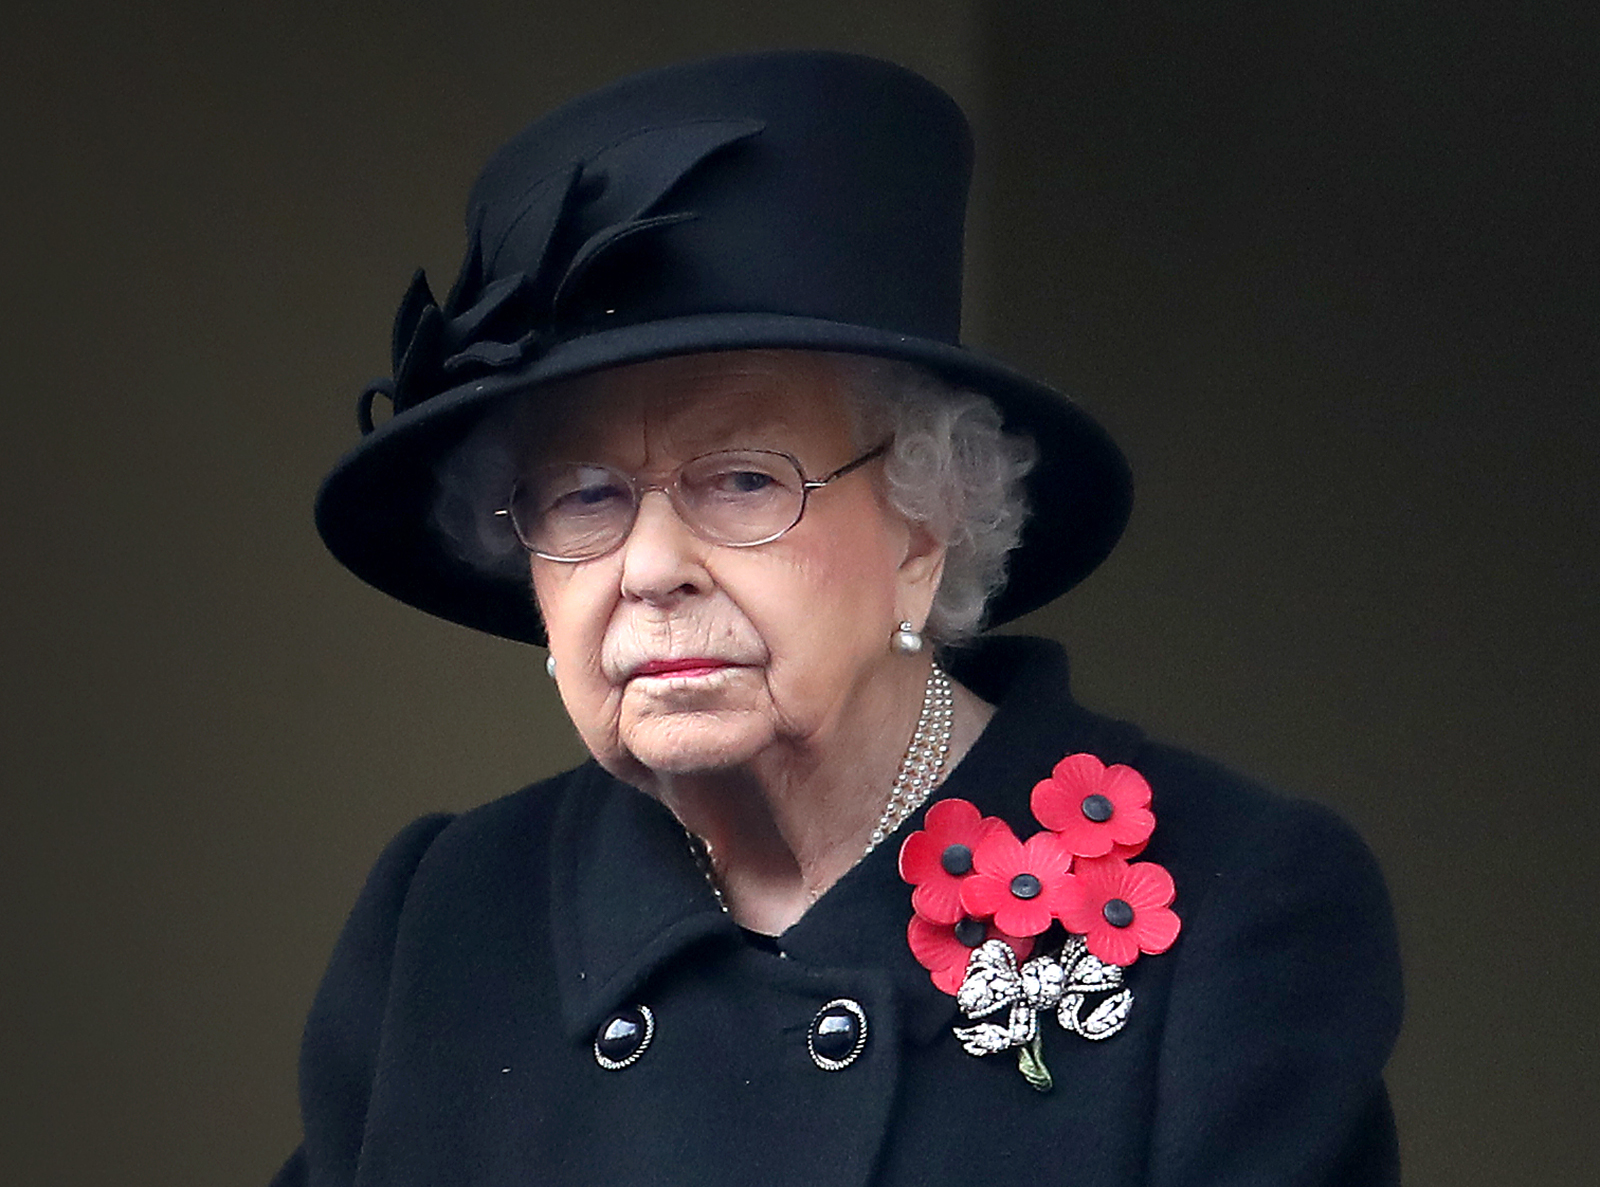 Queen Elizabeth II looks on during the Service of Remembrance at the Cenotaph at The Cenotaph on November 8, 2020 in London, England. 